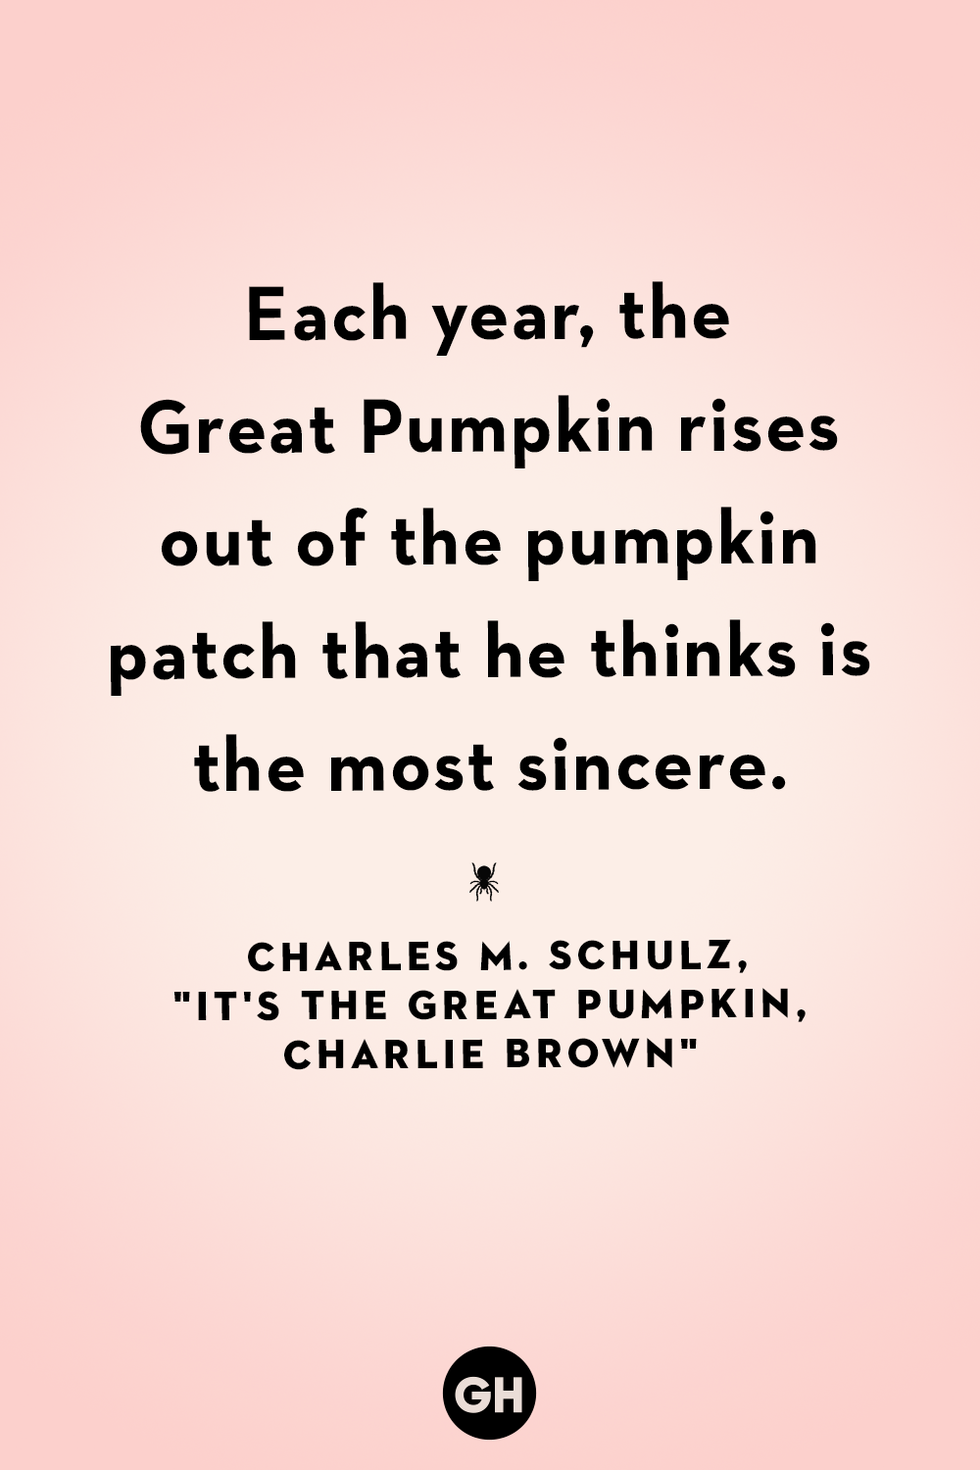 68 Best Halloween Quotes 2023 - Short and Scary Halloween Sayings